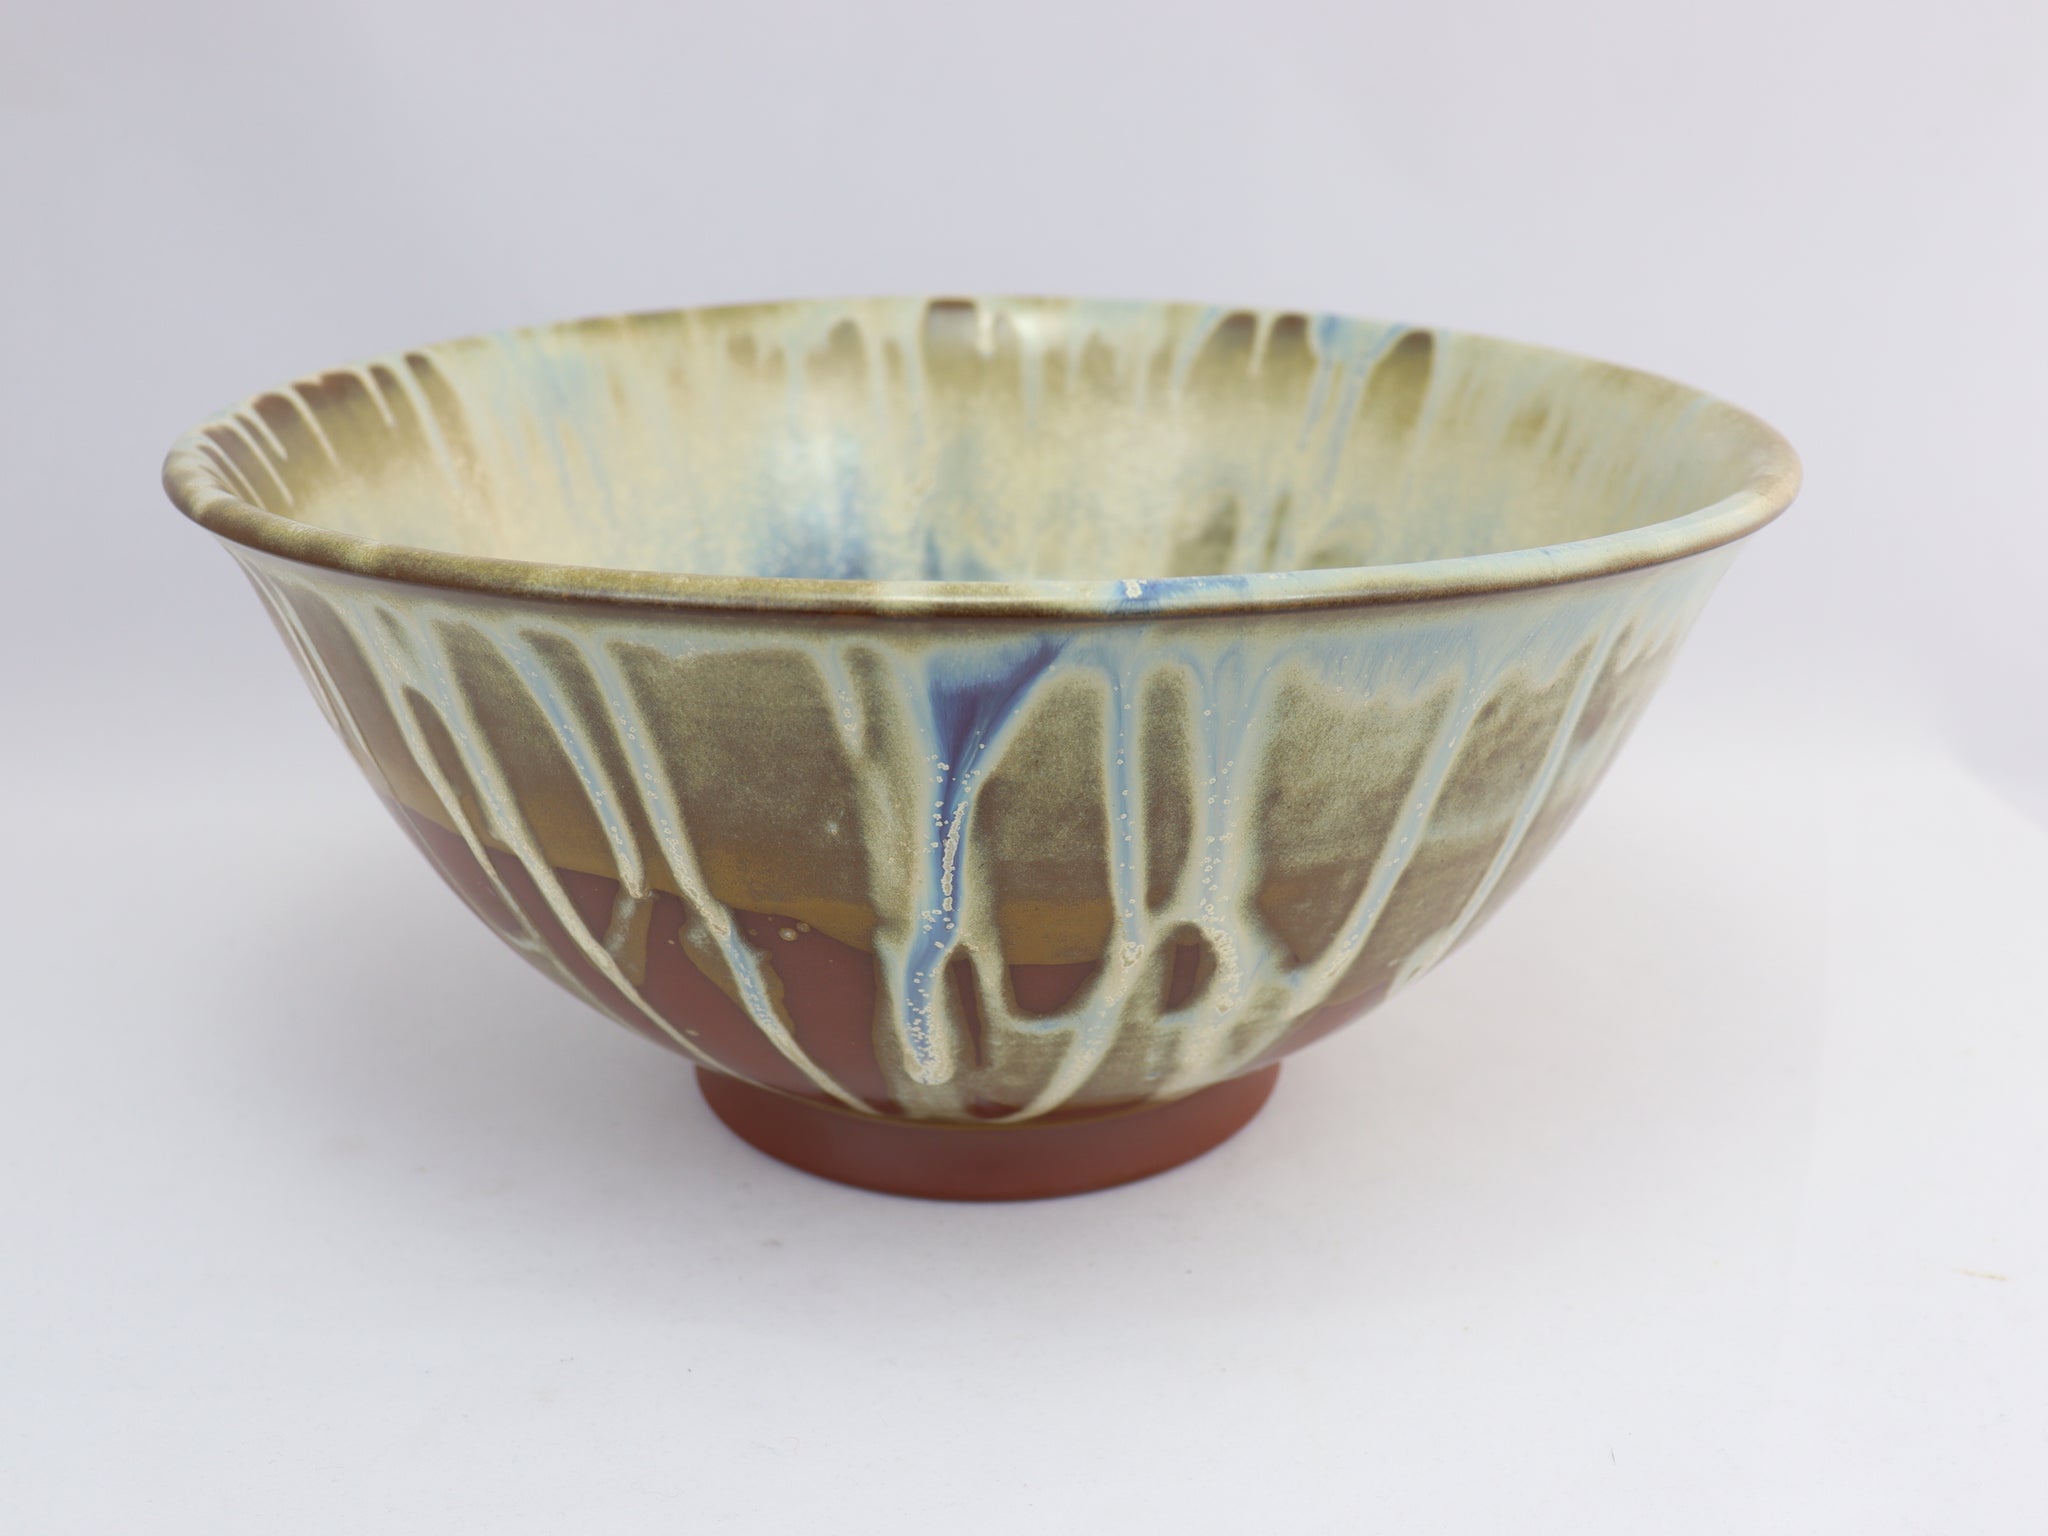 Bowl - 11.5 inches wide (29 cm) - Fundraiser